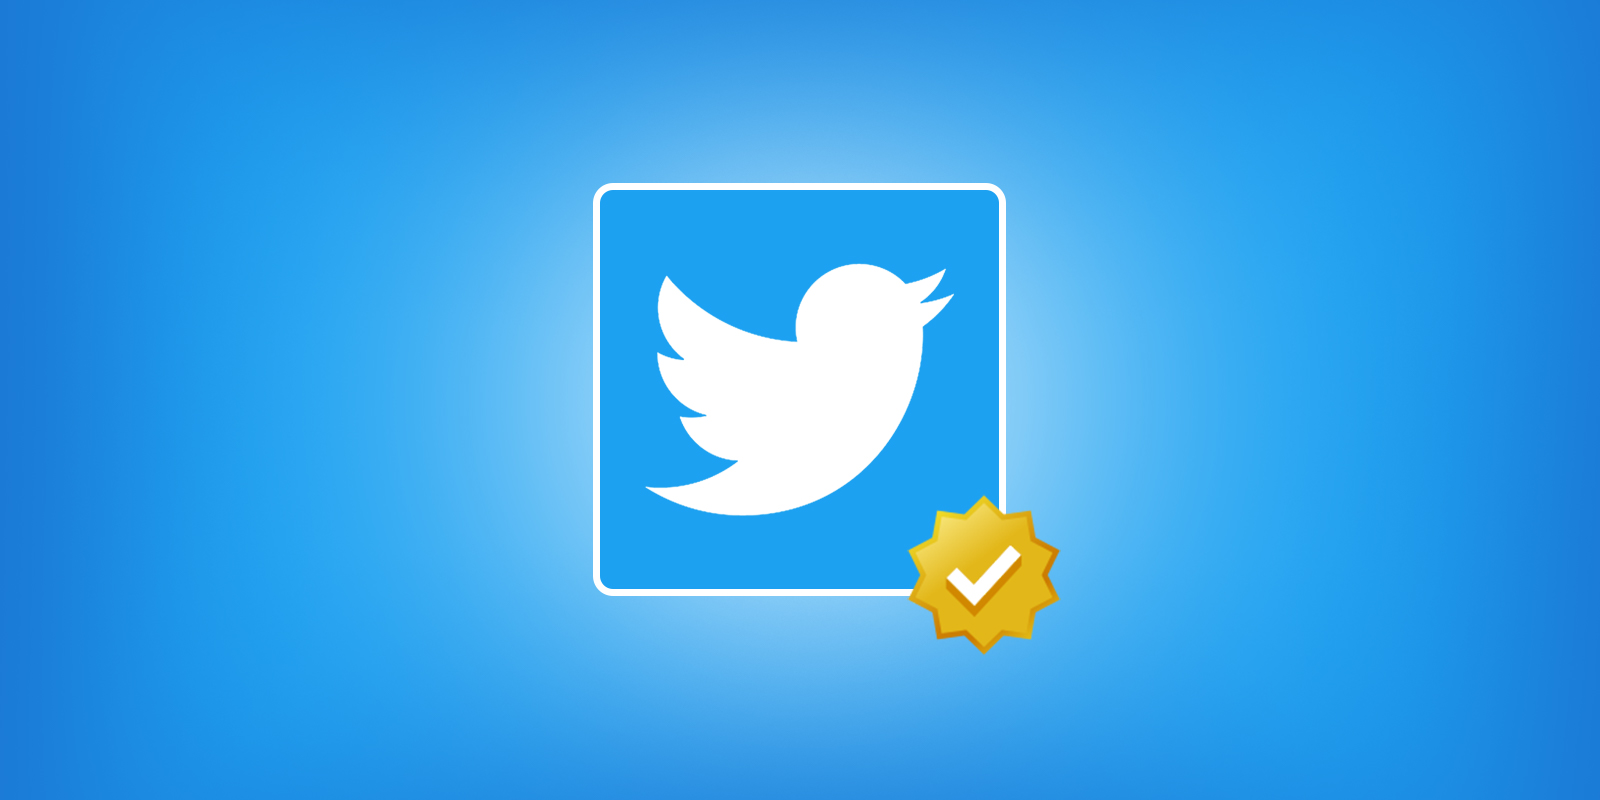 Twitter gold verified badge for $1,000